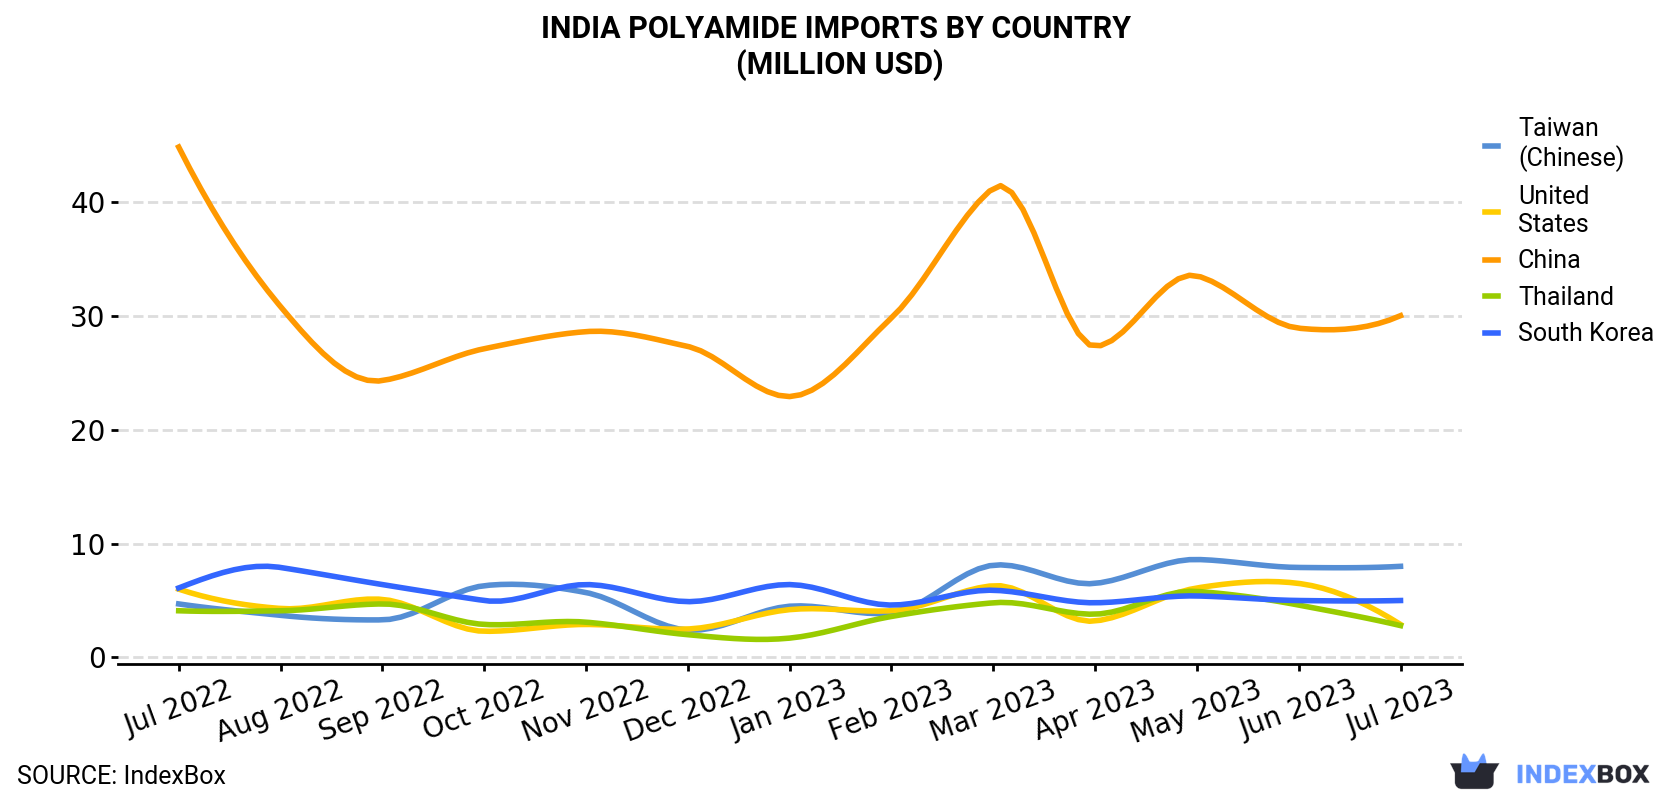 India Polyamide Imports By Country (Million USD)